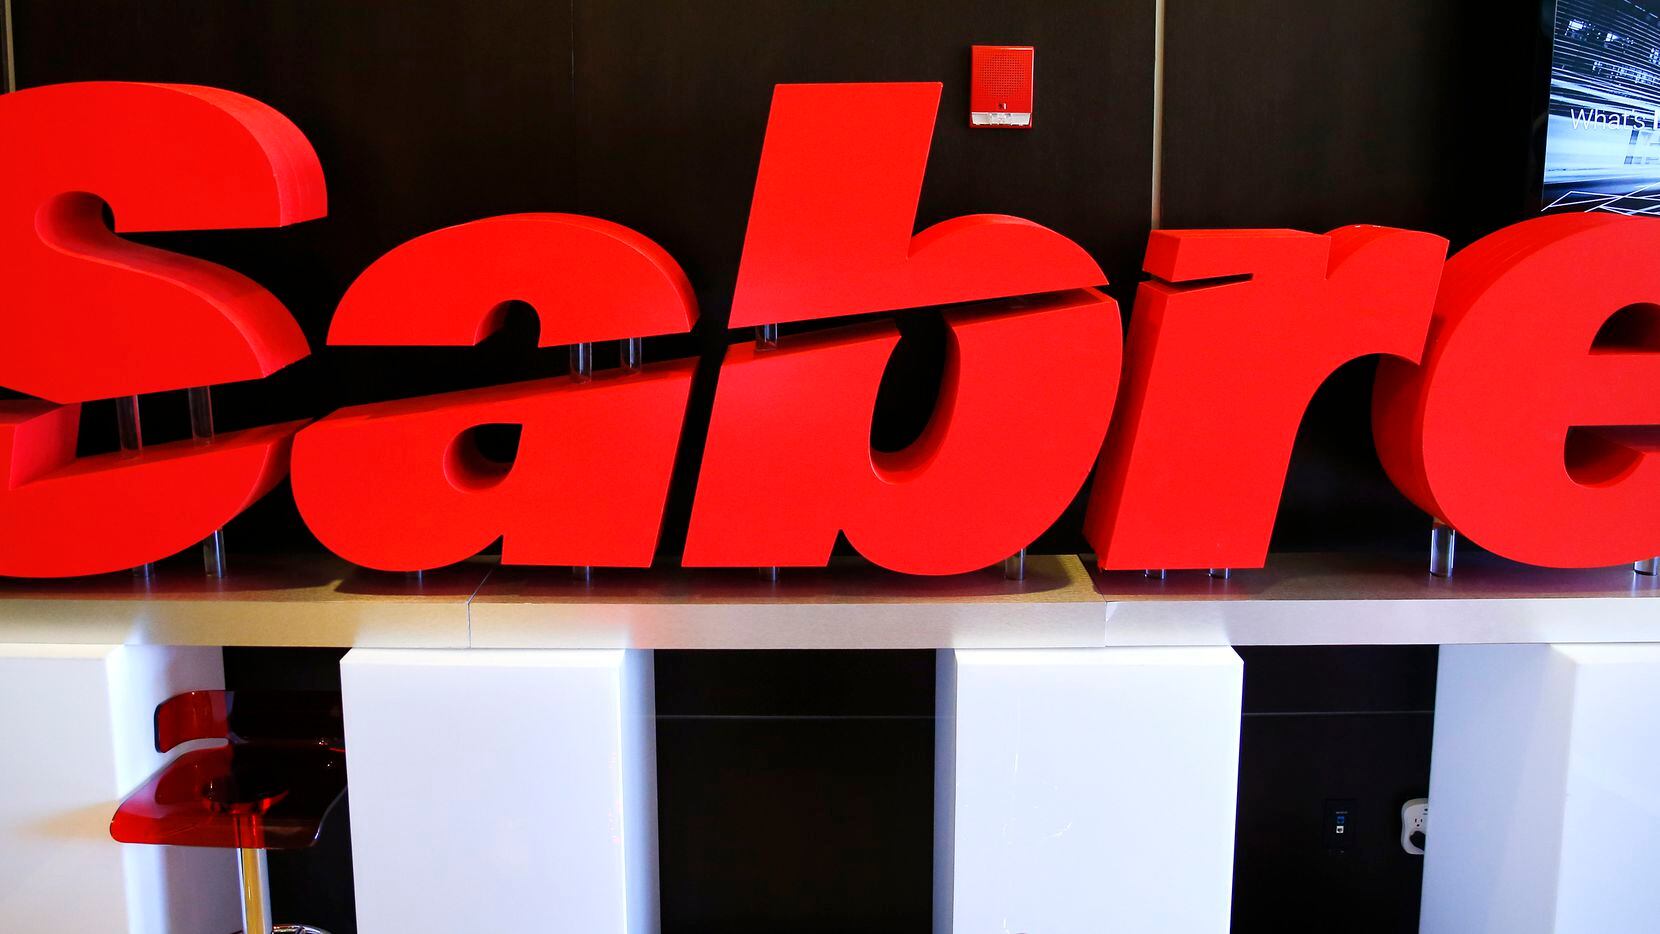 Sabre logo on display at the investor day conference held at the Hilton Southlake Town Square, Tuesday, March 6, 2018.  The technology and software company outlined its strategy for 2018 and surveyed the competitive landscape. (Tom Fox/The Dallas Morning News)